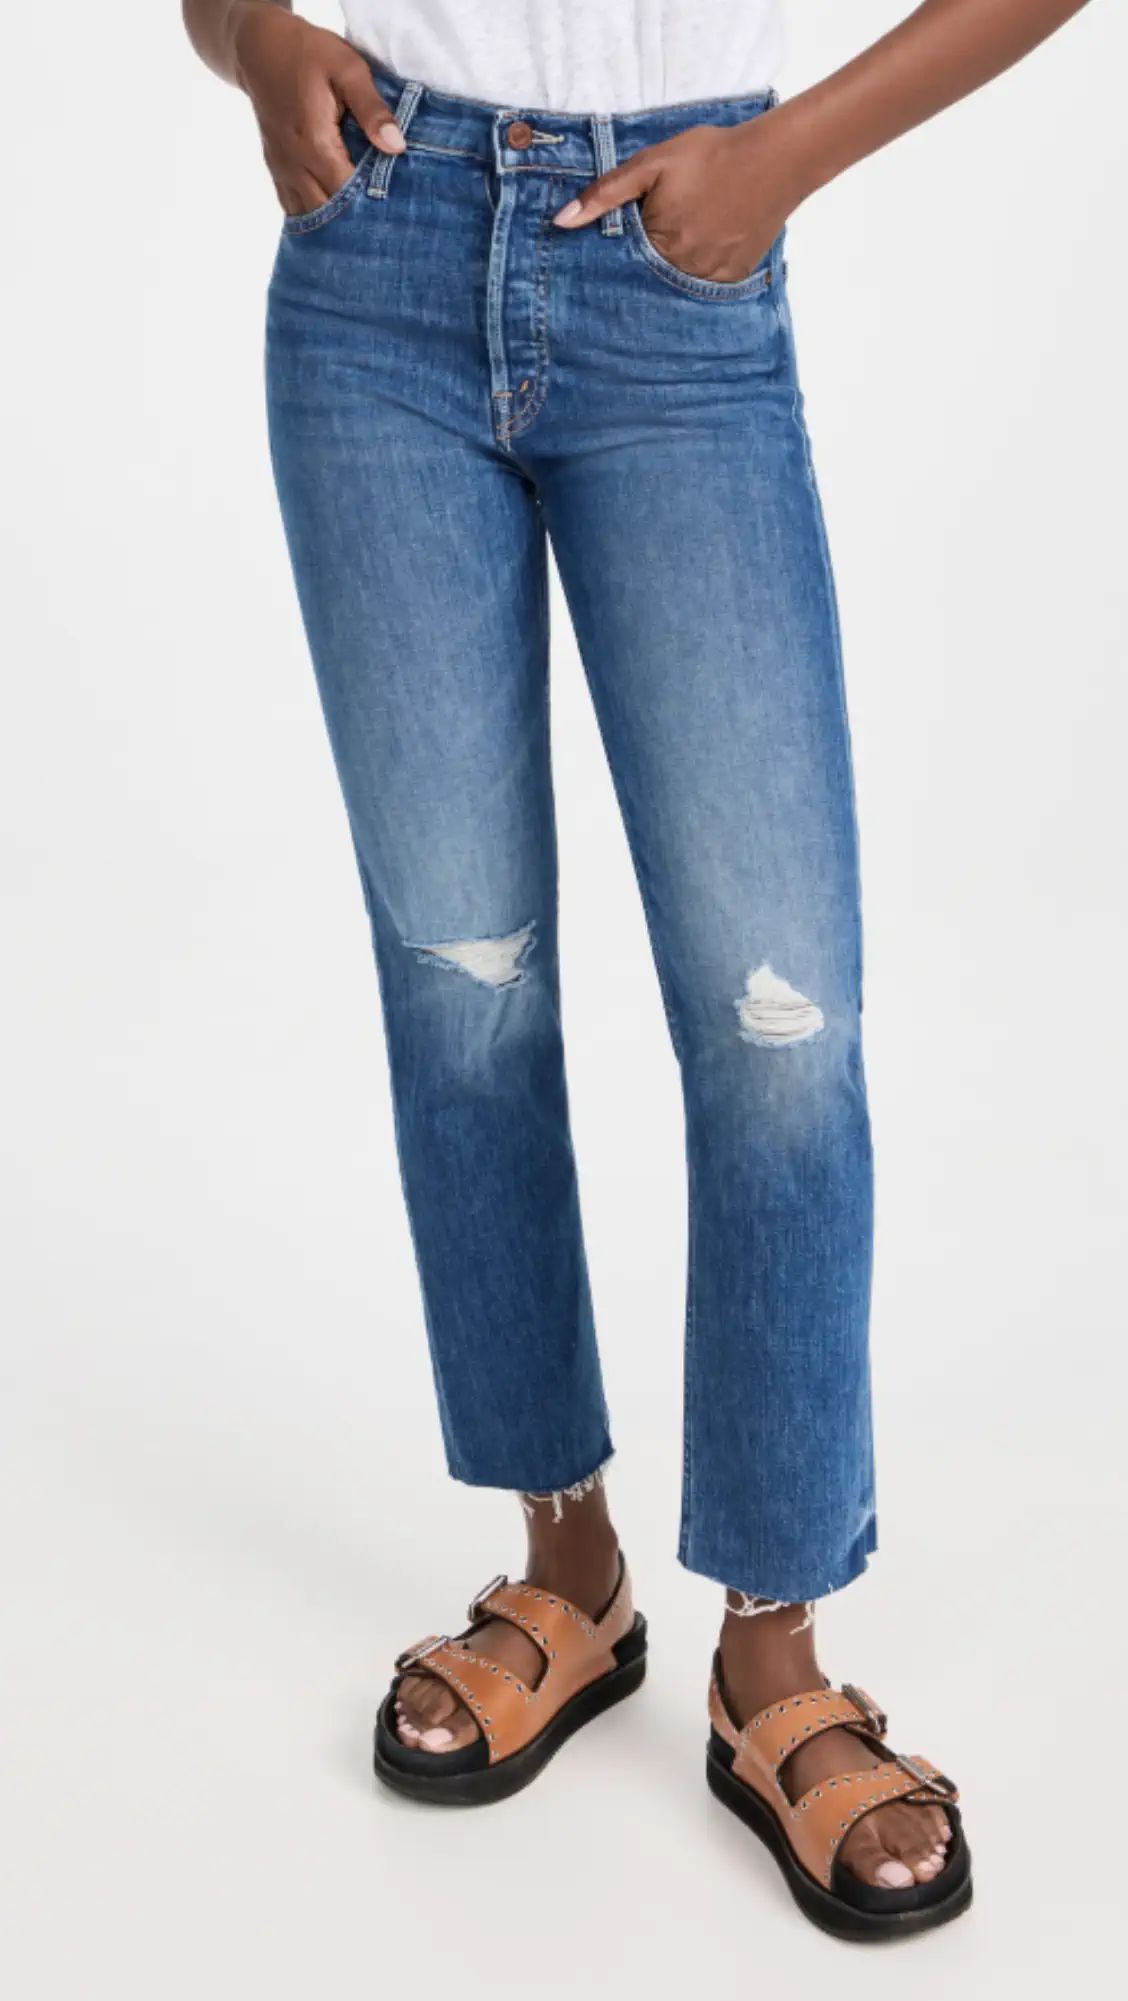 MOTHER The Tomcat Ankle Fray Jeans | Shopbop | Shopbop